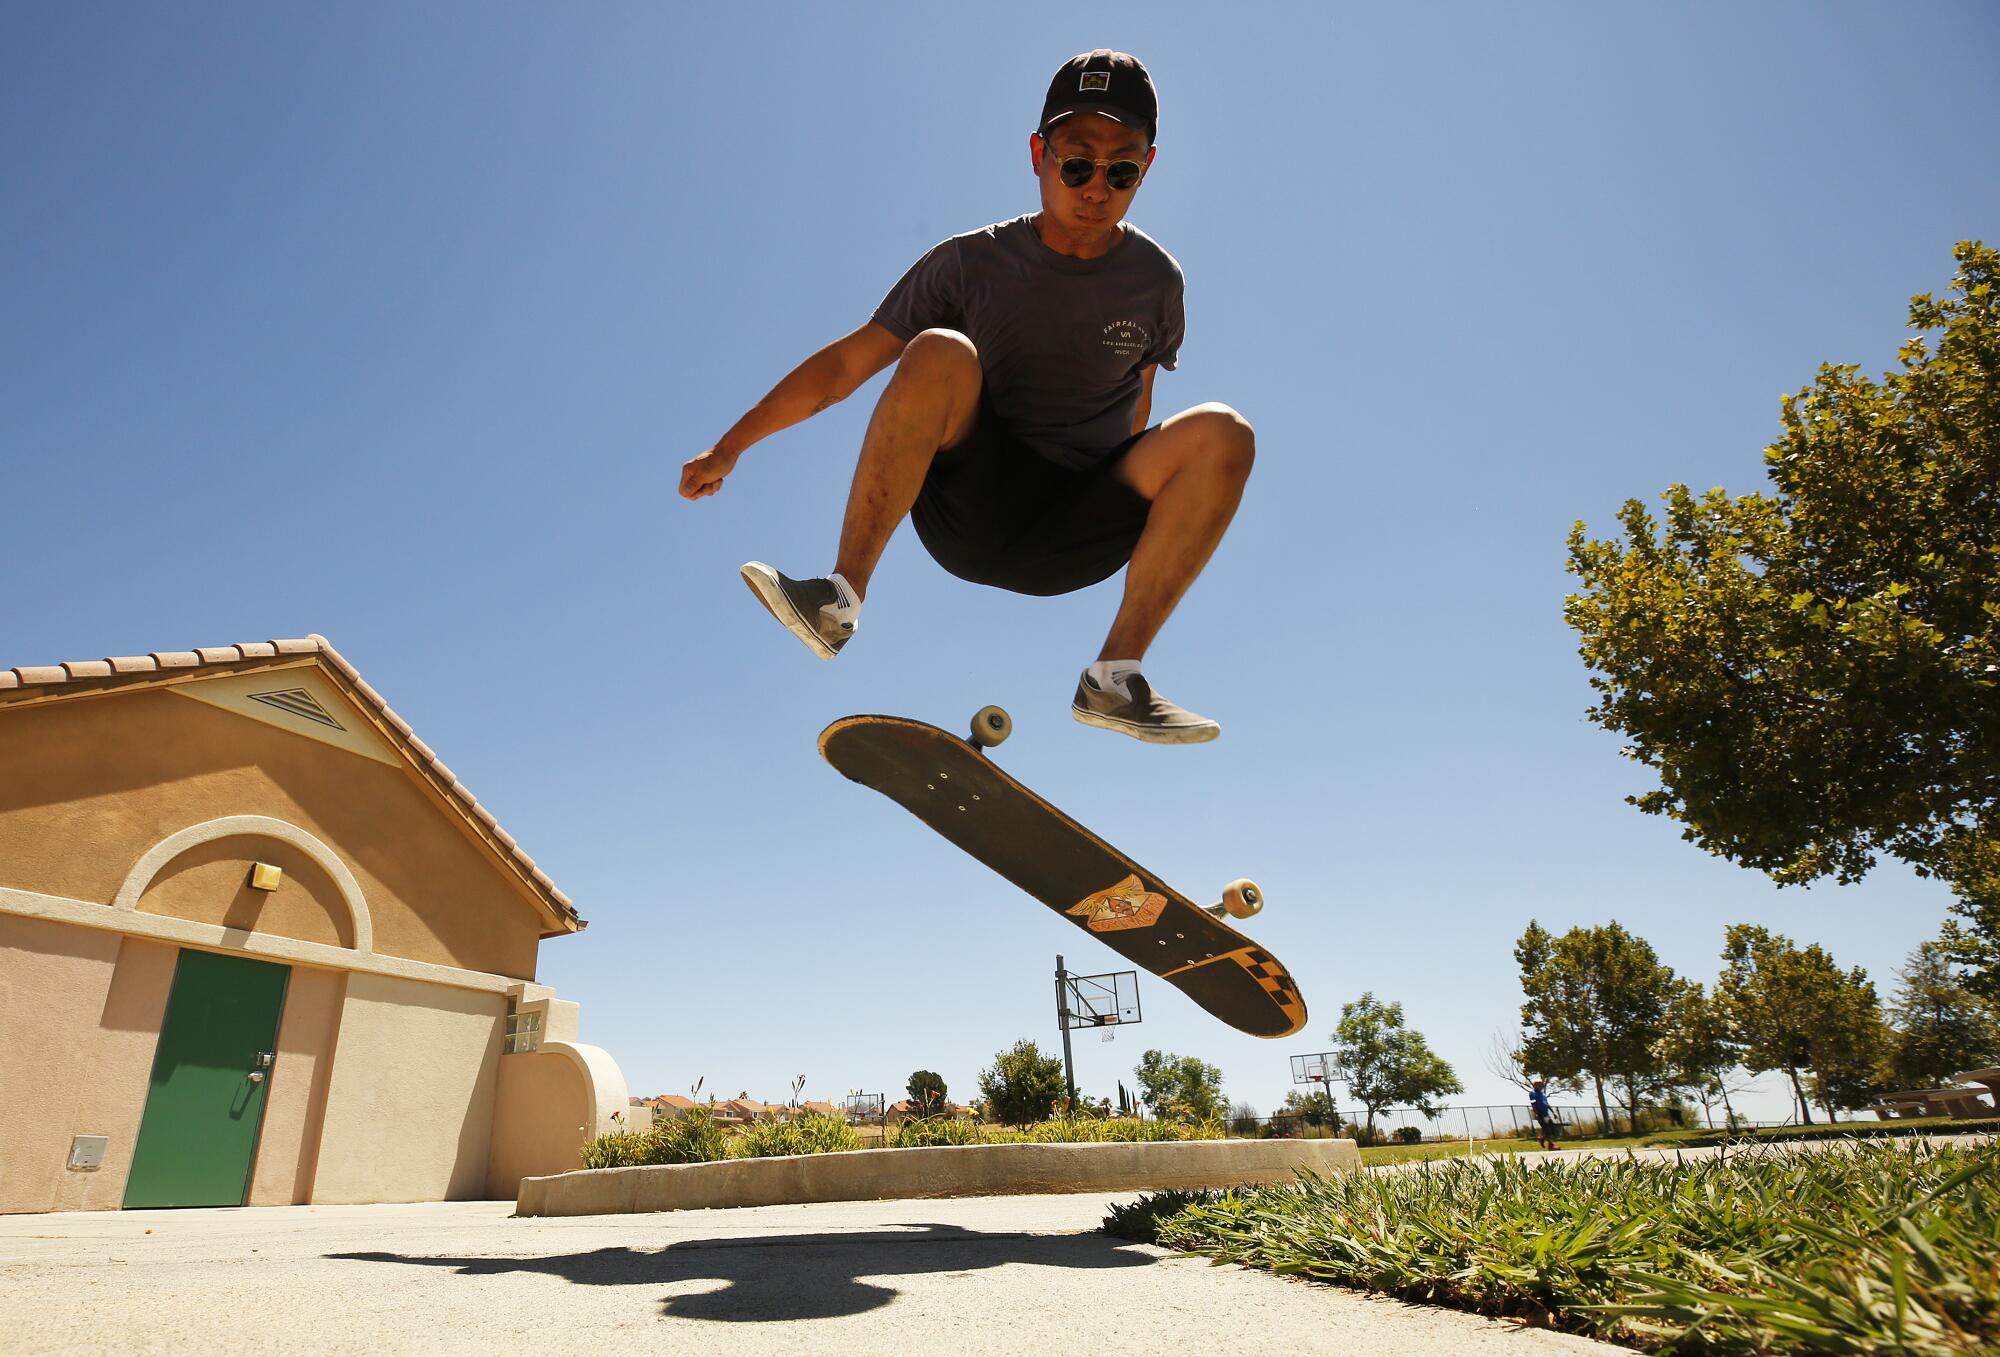 Brian Park, 27, takes a break from classes at CSUN to practice a Kickflip on his skateboard on Aug. 2 at Porter Ranch Park. 